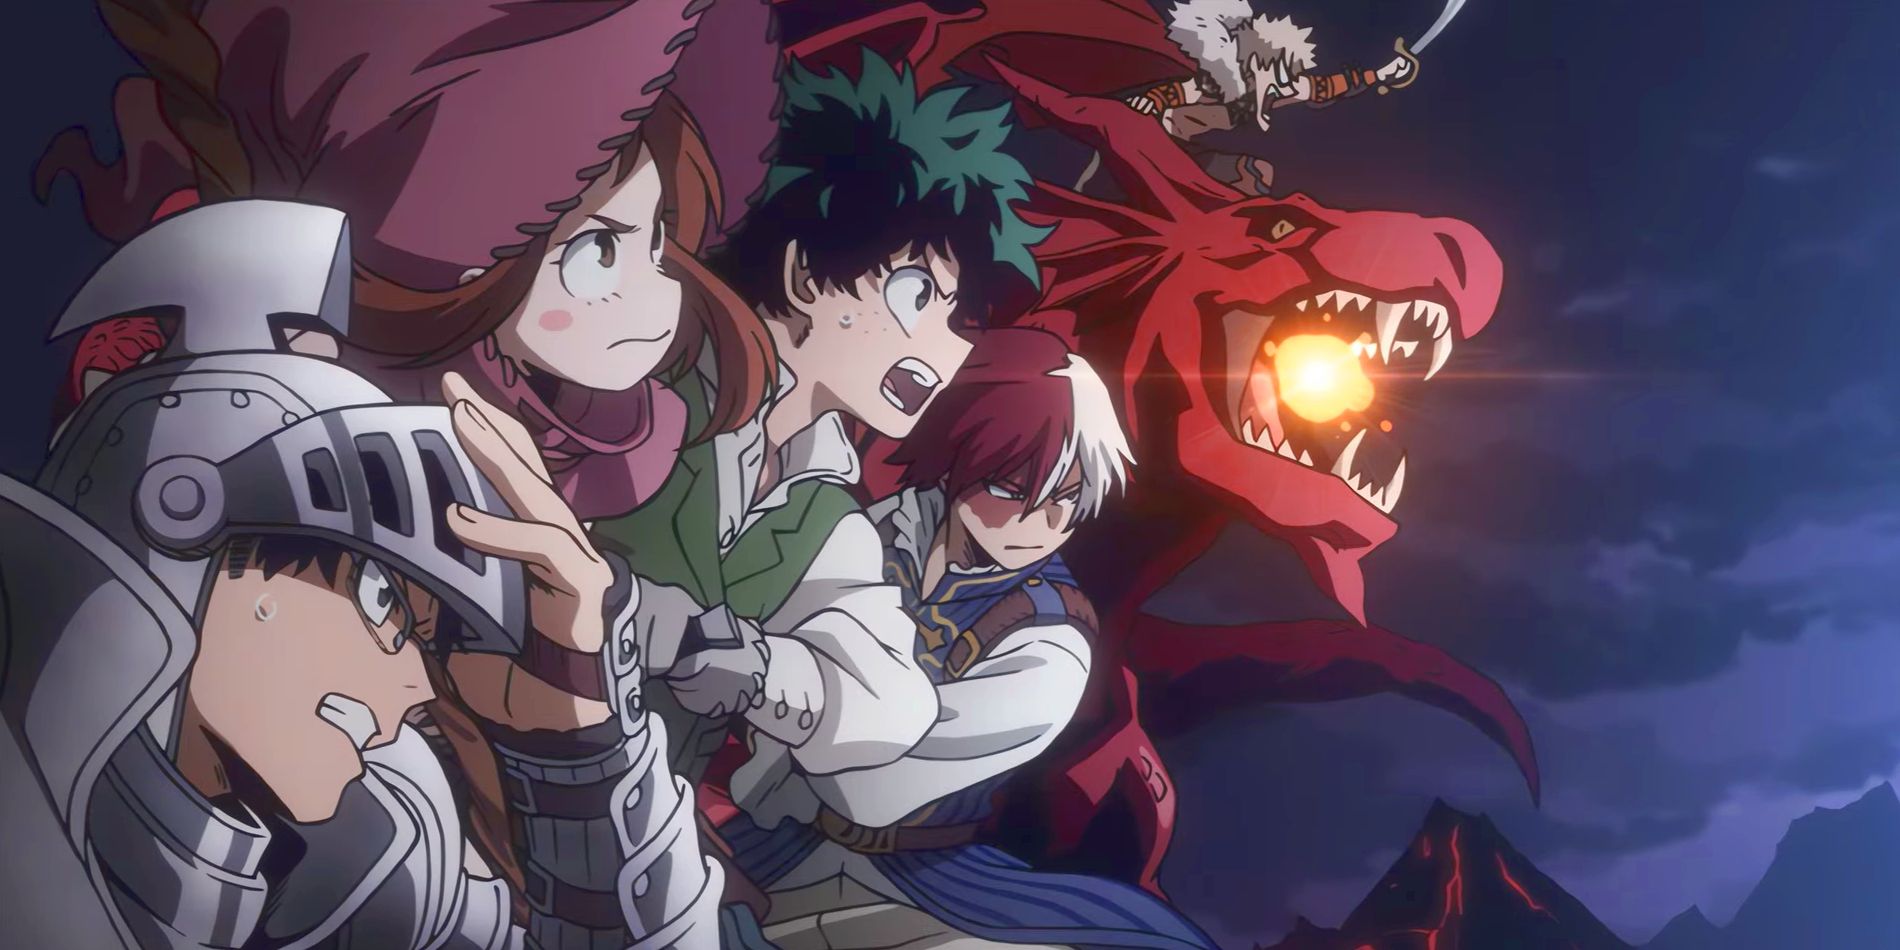 Screenshot from My Hero Academia Ending 3 shows Deku, Bakugo, and other cast dressed as Fantasy versions lining up to fight a villain.